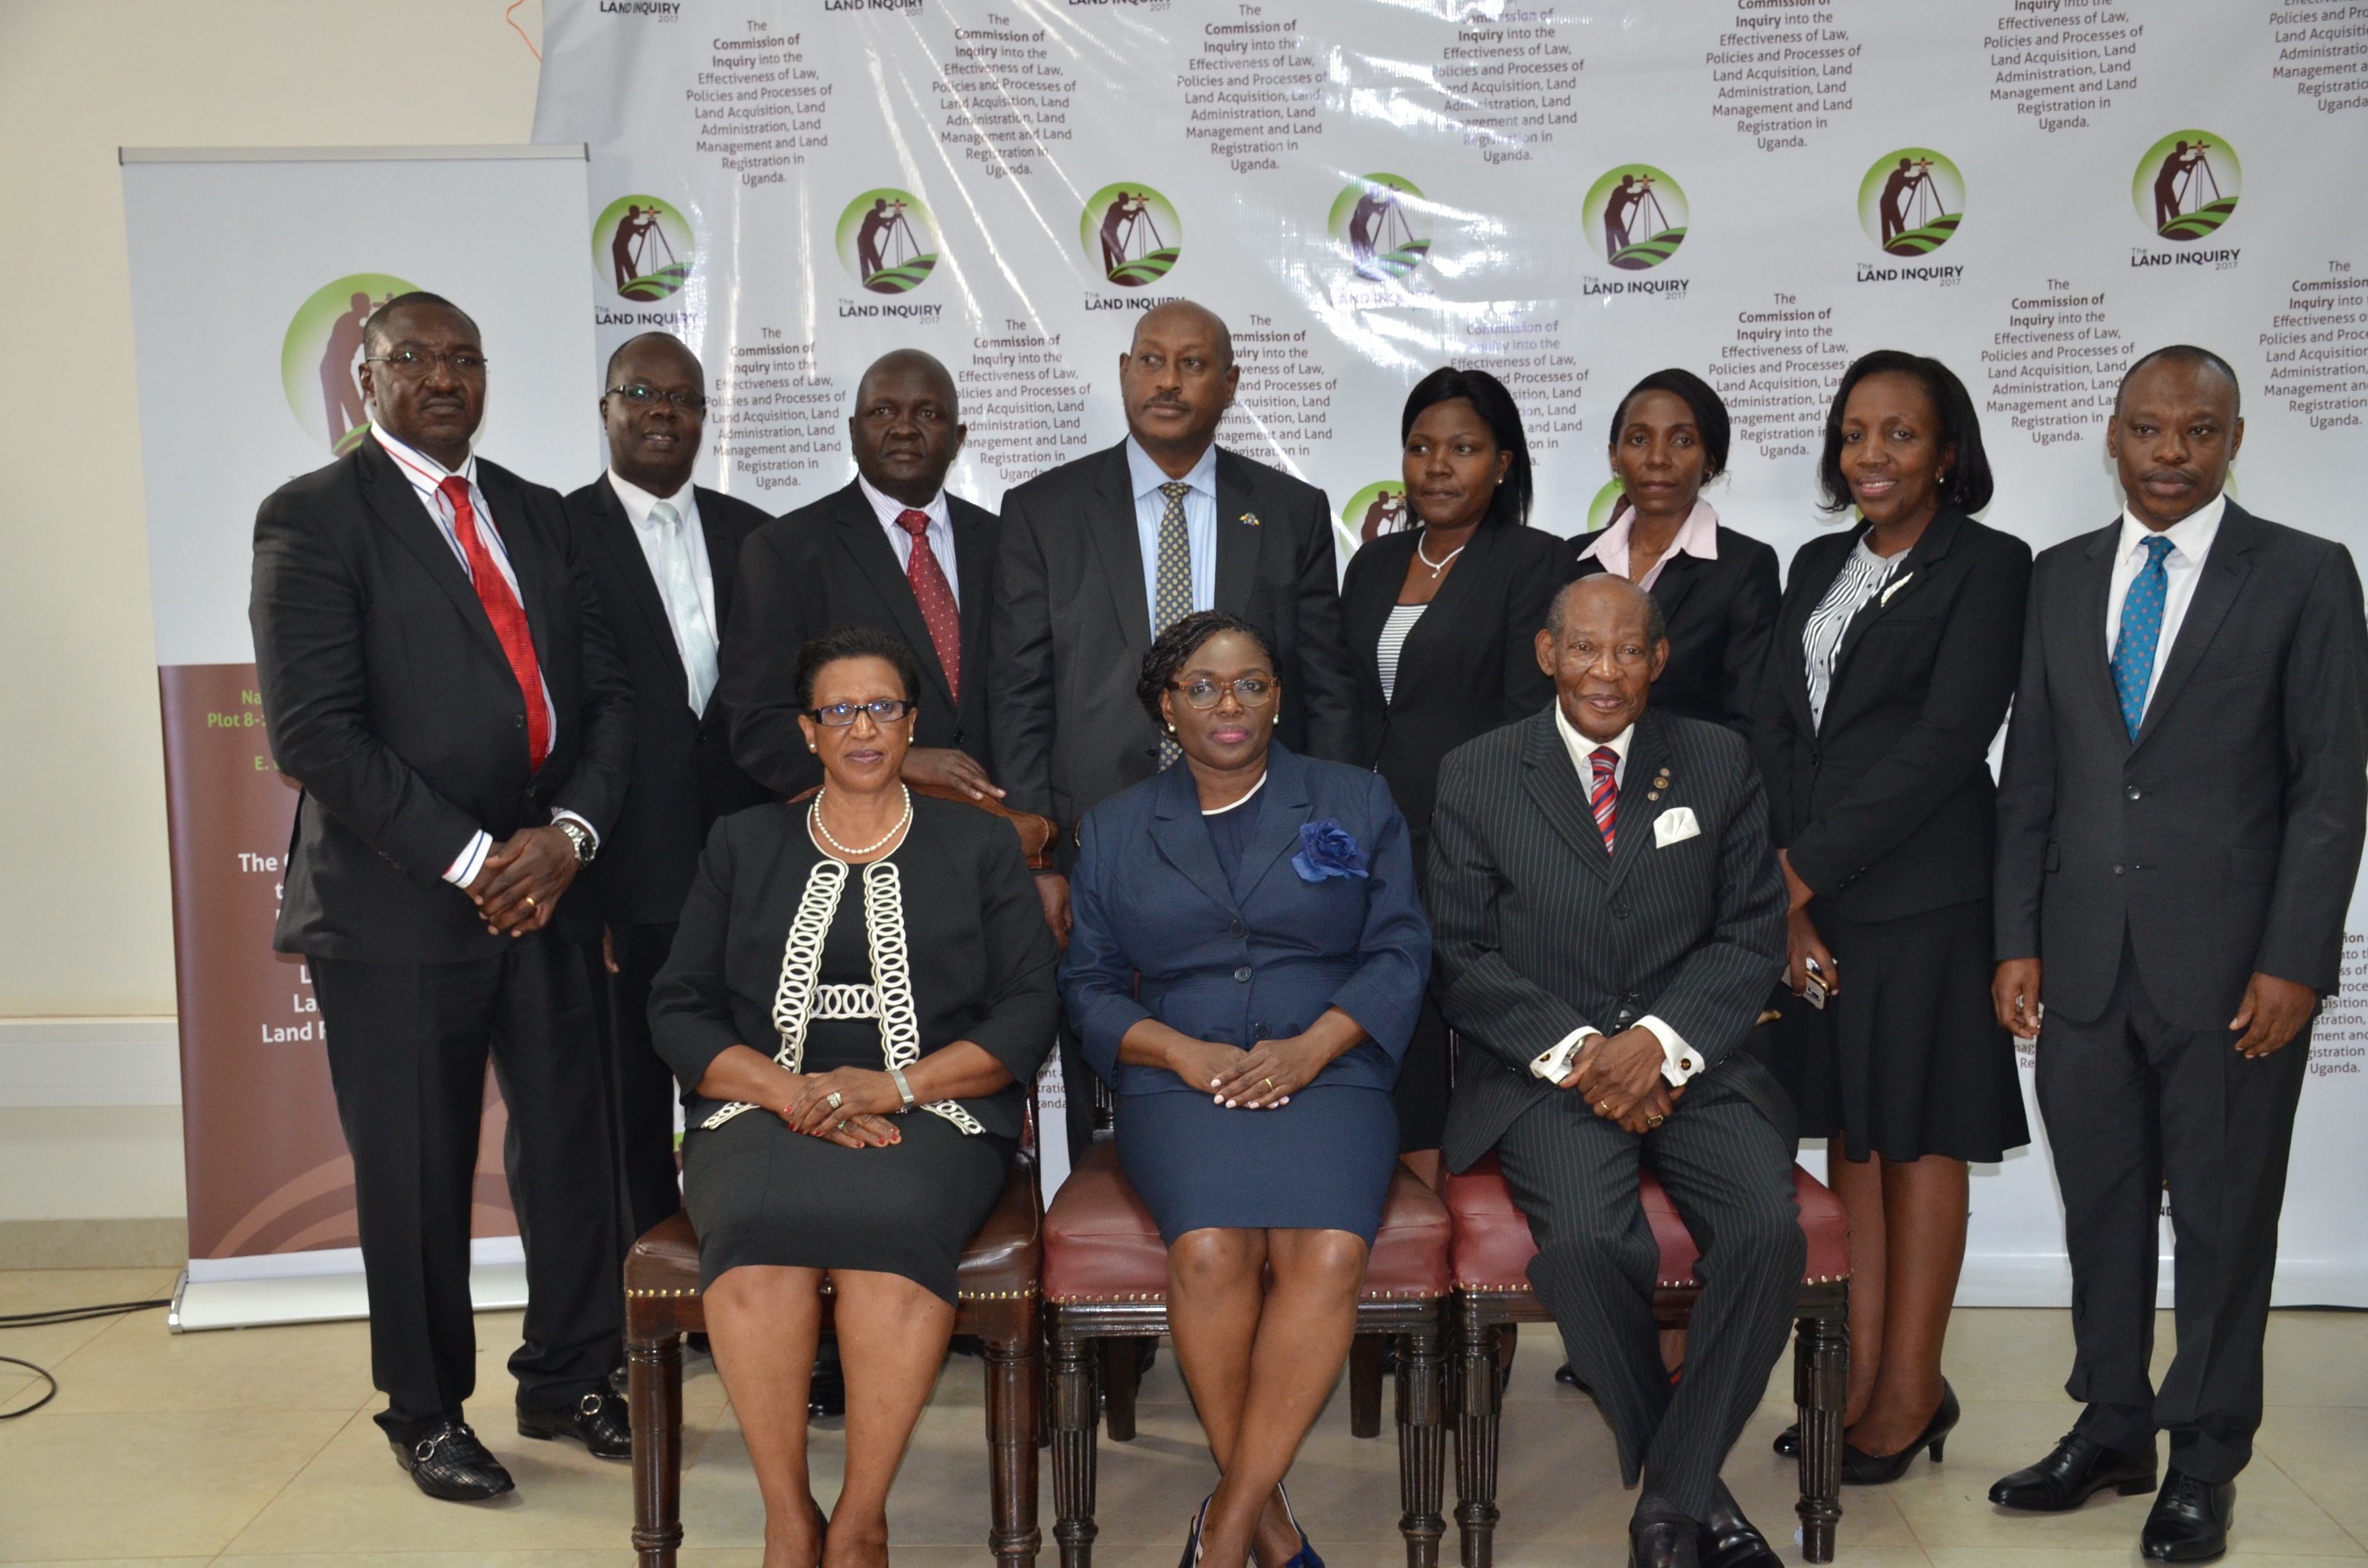 The Commission members and its Secretary, Assistant Secretary, Lead Counsel and Assistant Lead Counsel